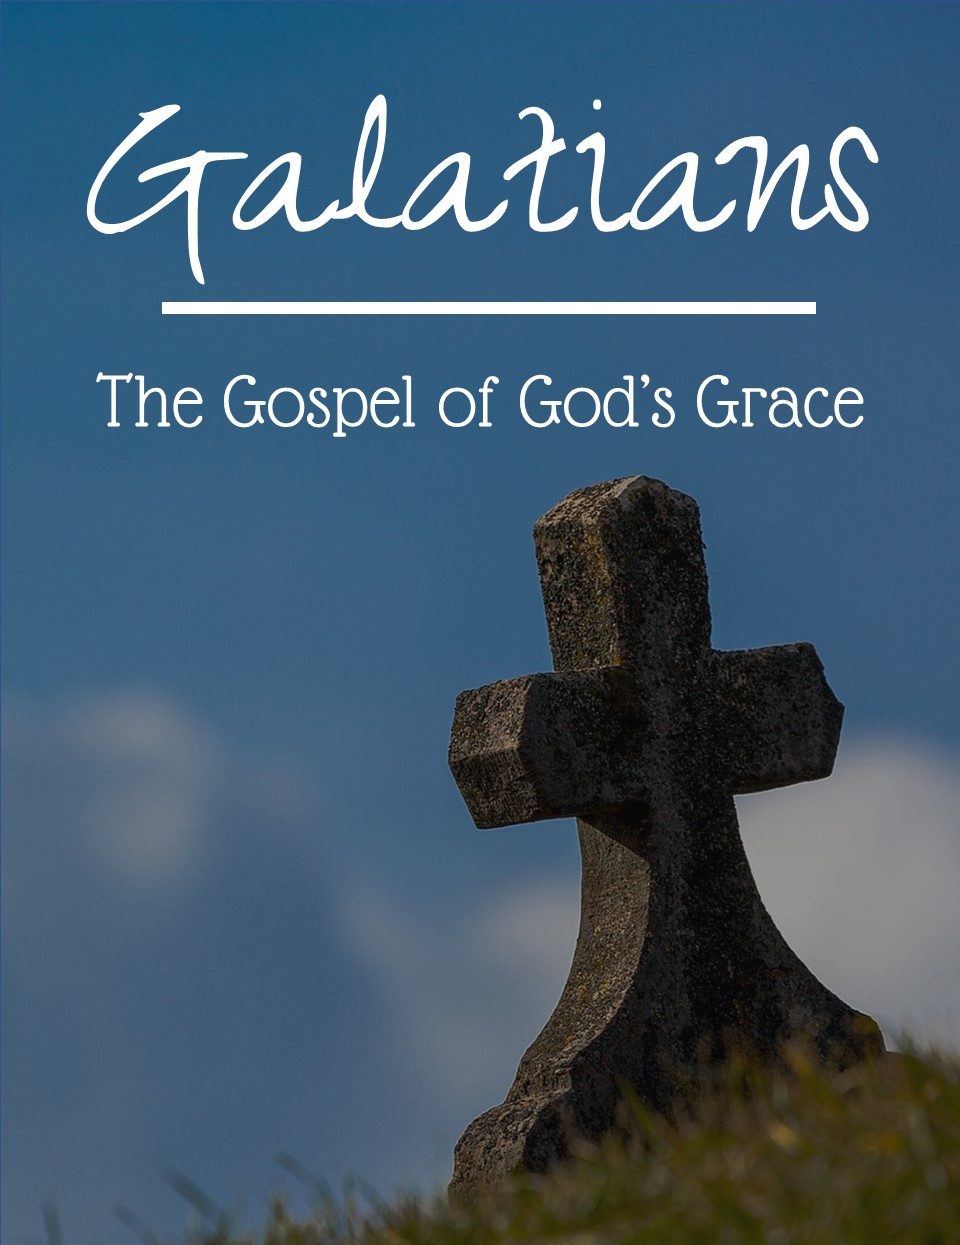 The Glory and Grace of the Cross